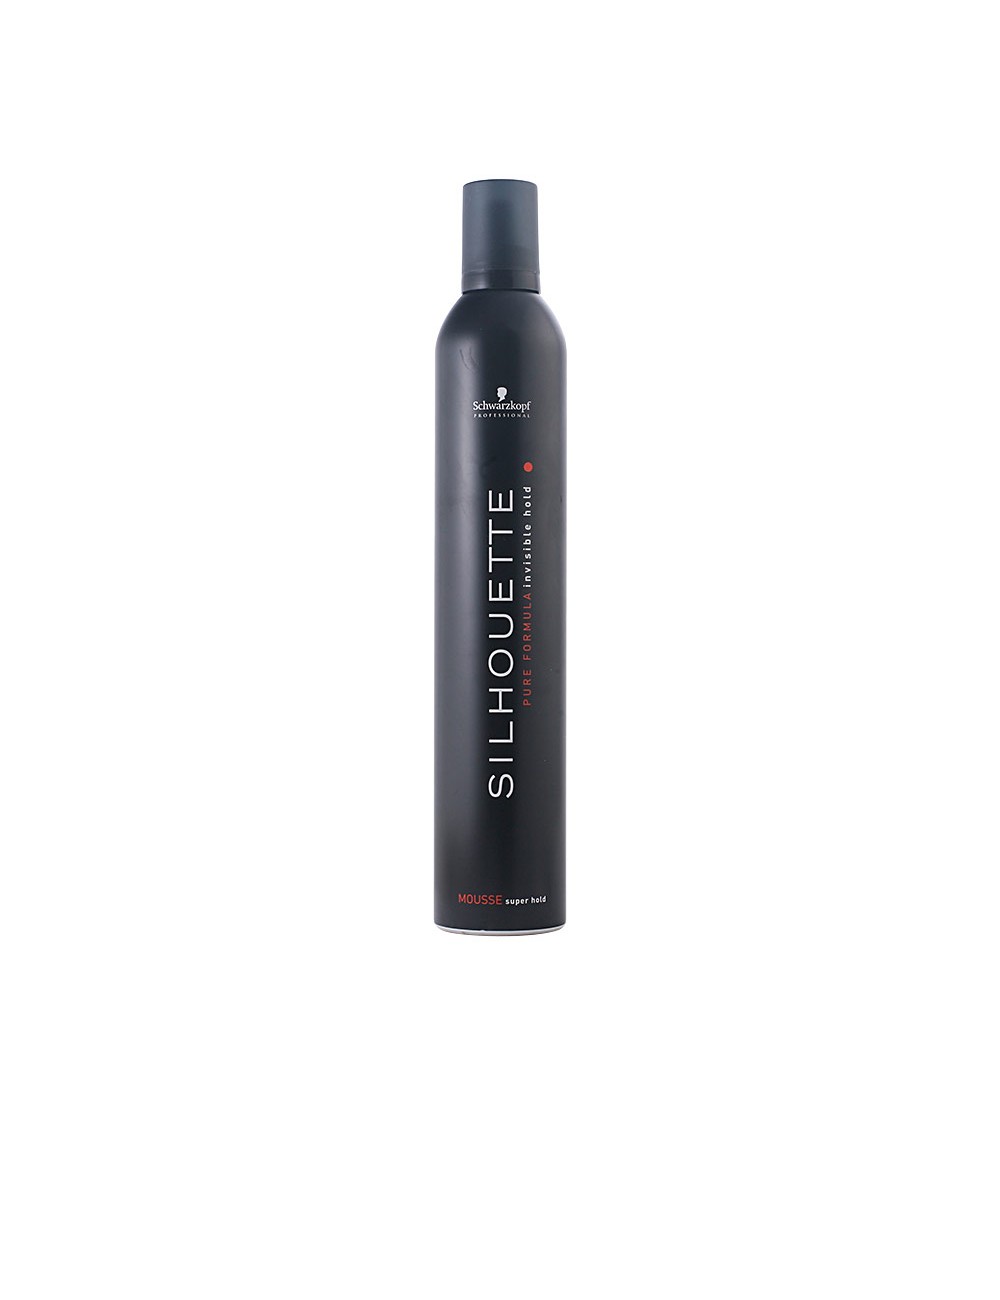 SILHOUETTE super hold mousse 500 ml